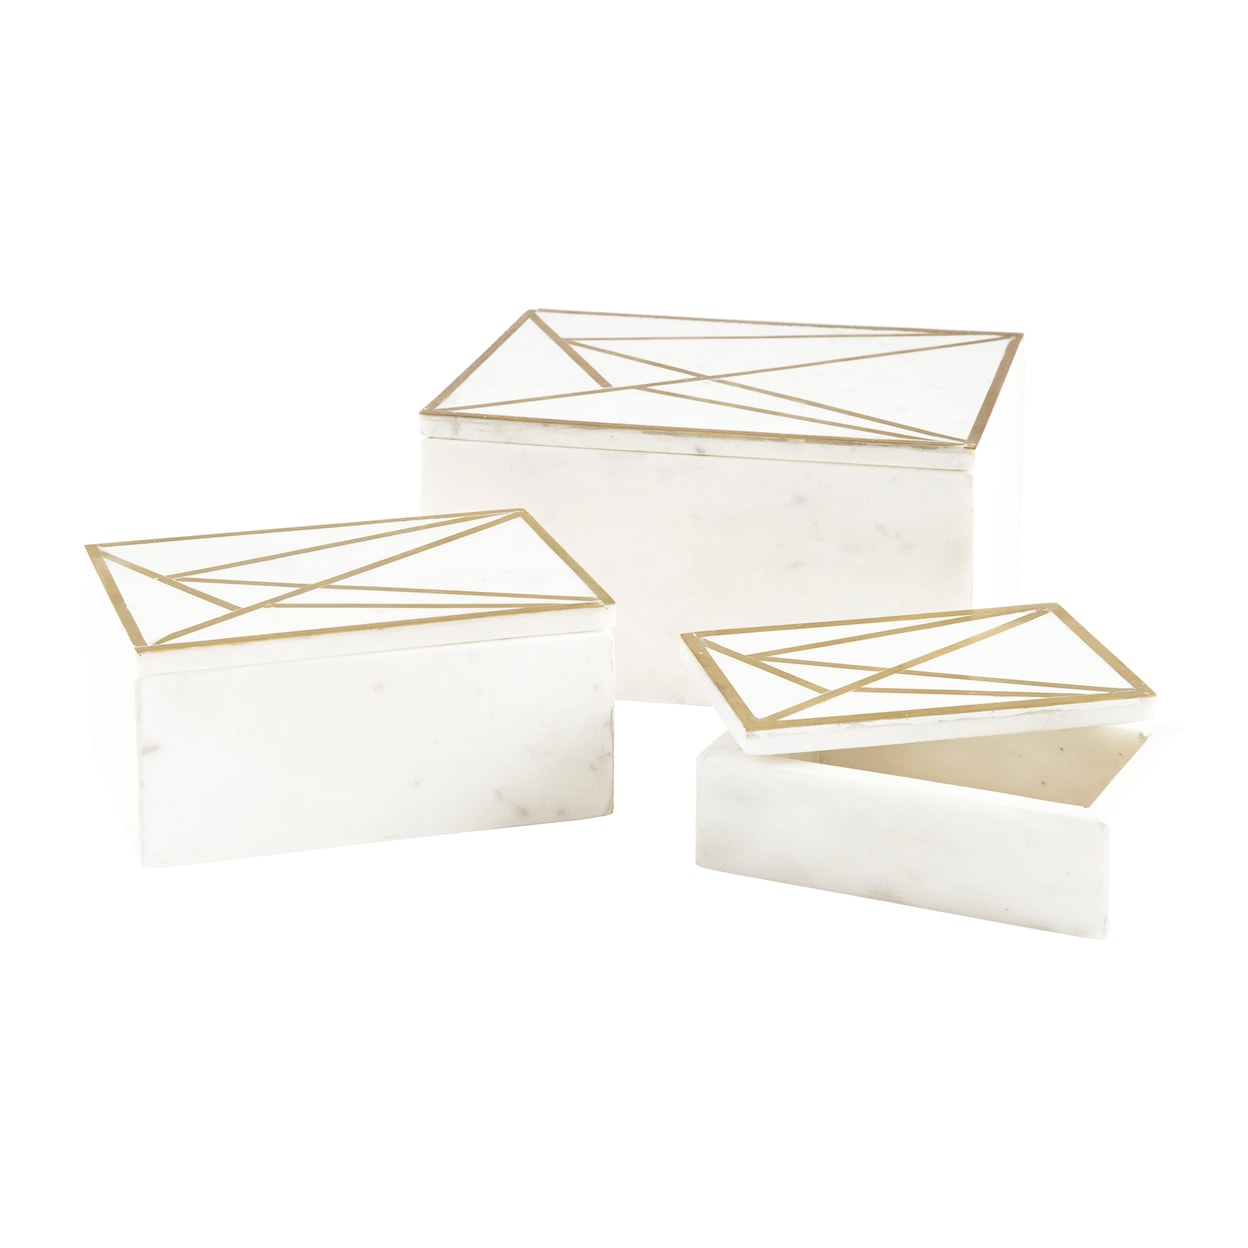 Signature Design by Ashley Ackley Ackley Box (Set of 3)